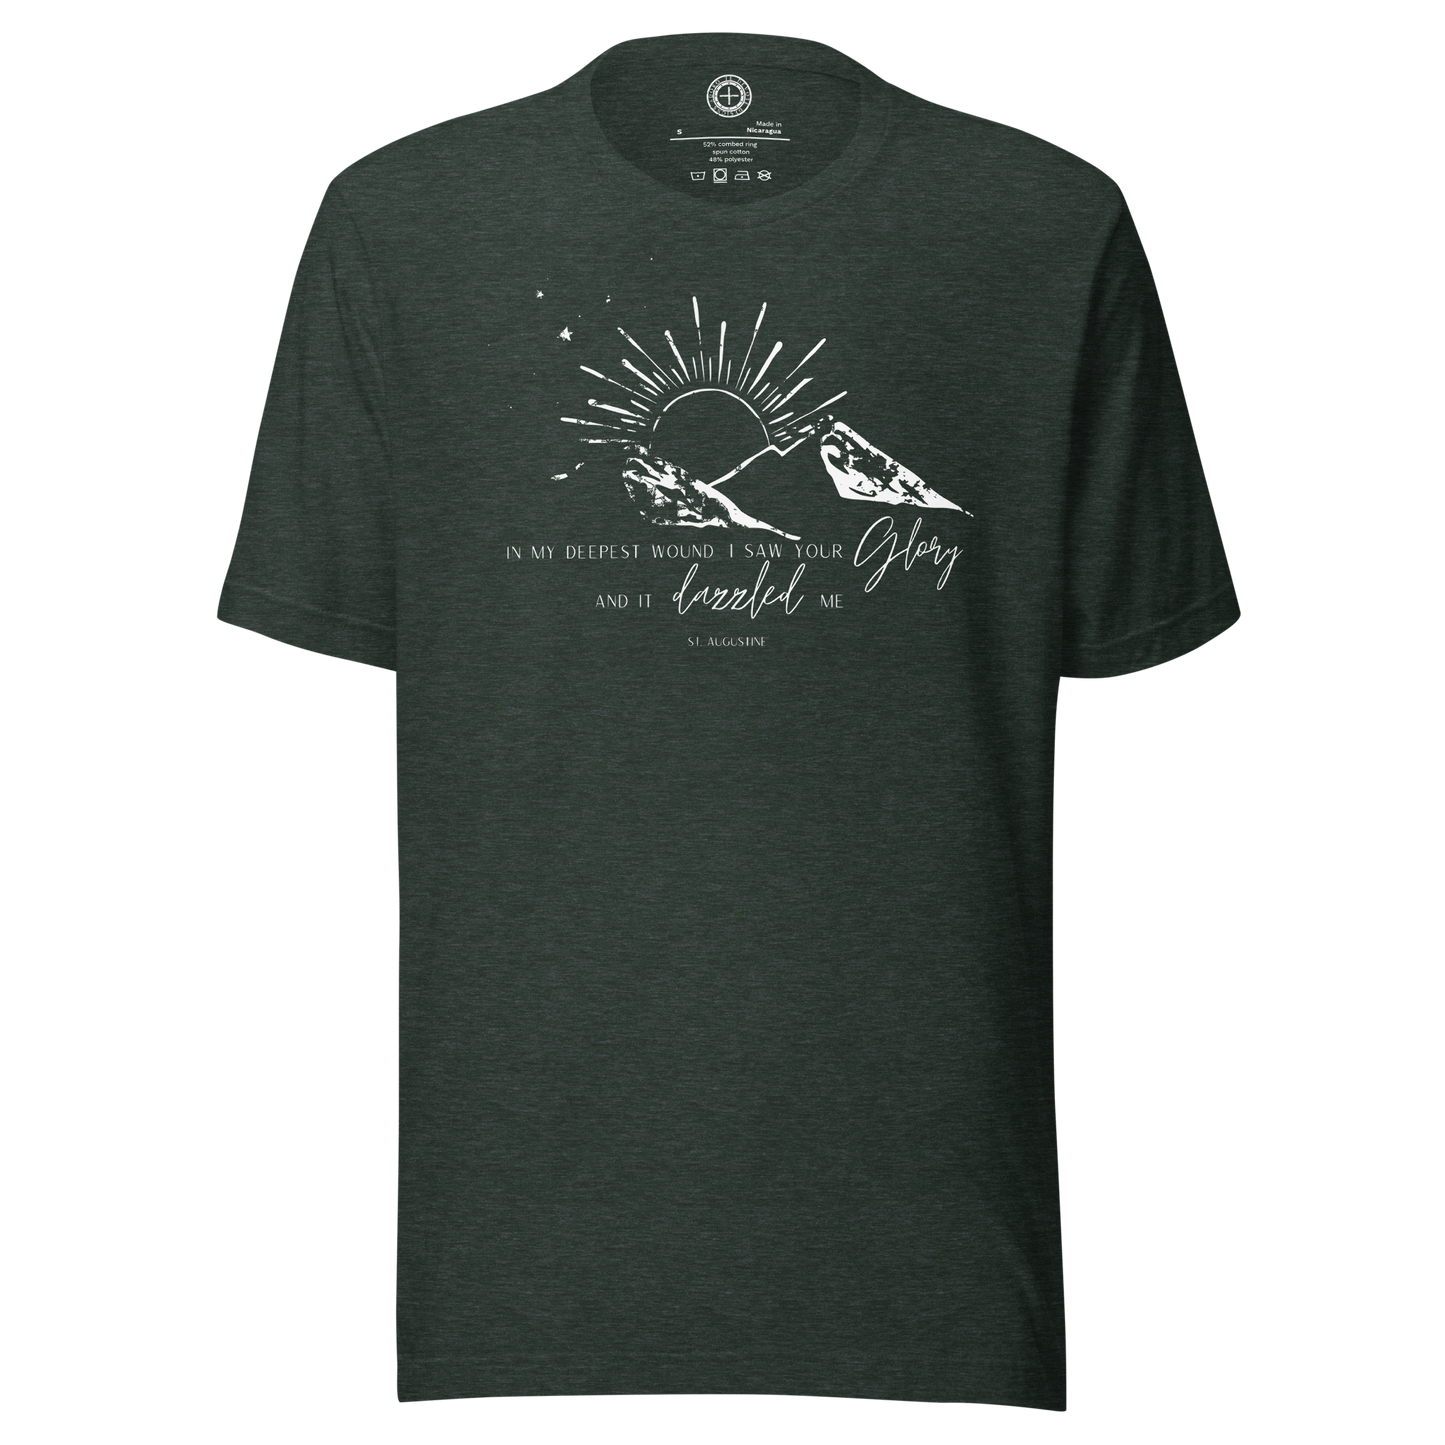 St. Augustine Quote Shirt